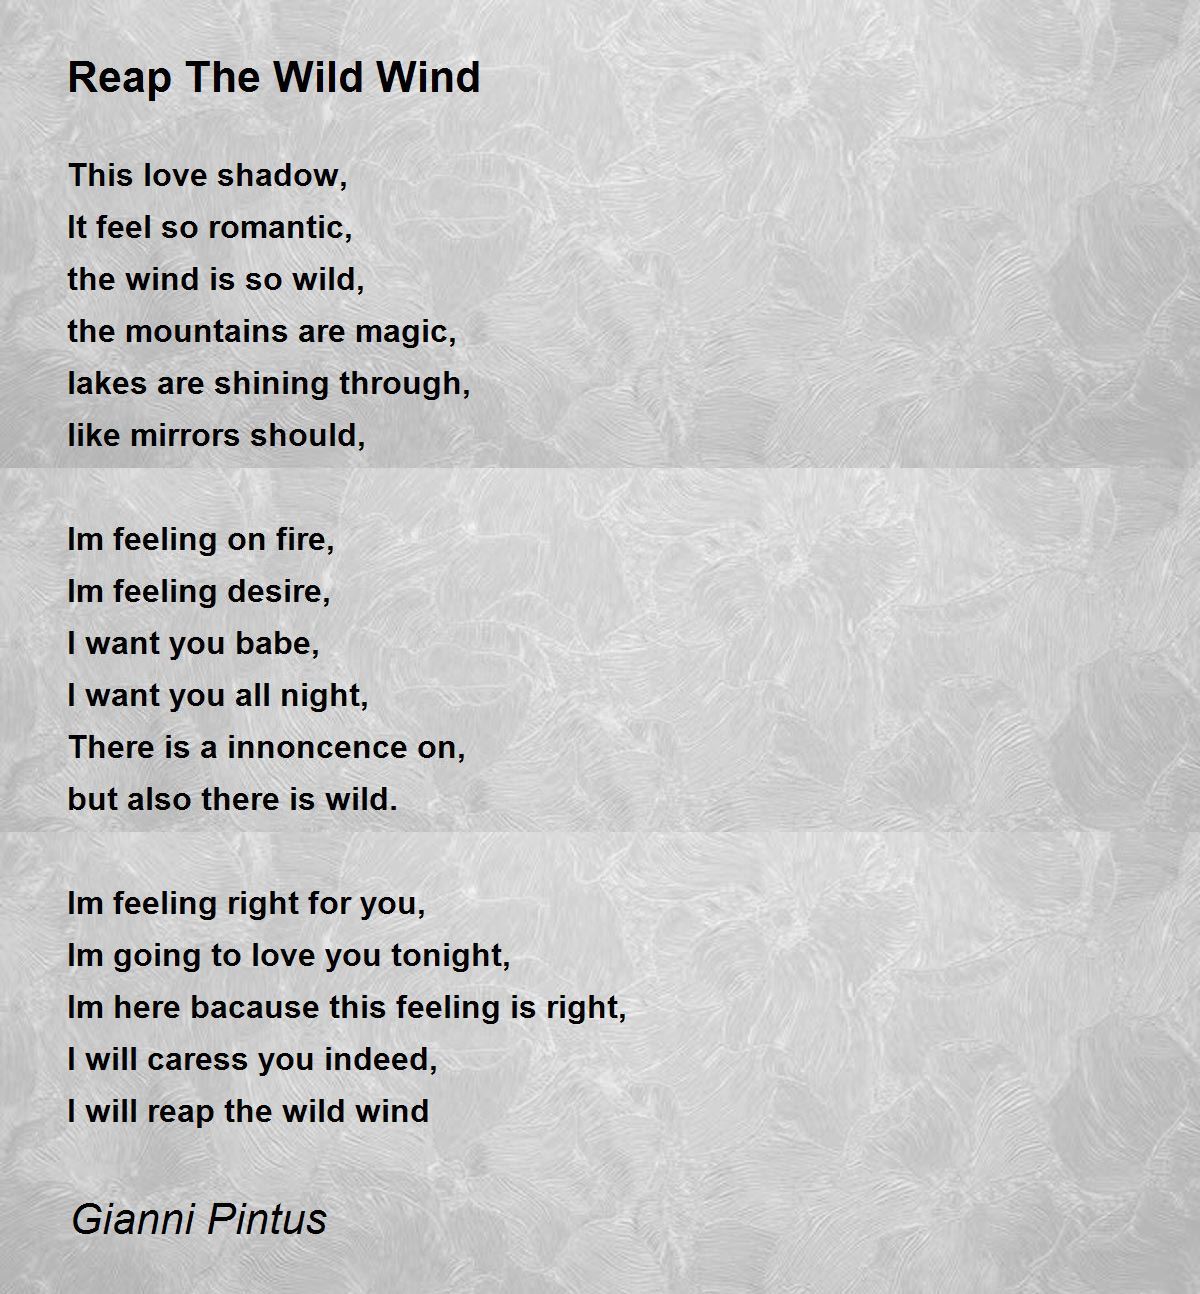 Reap The Wild Wind - Reap The Wild Wind Poem by Gianni Pintus